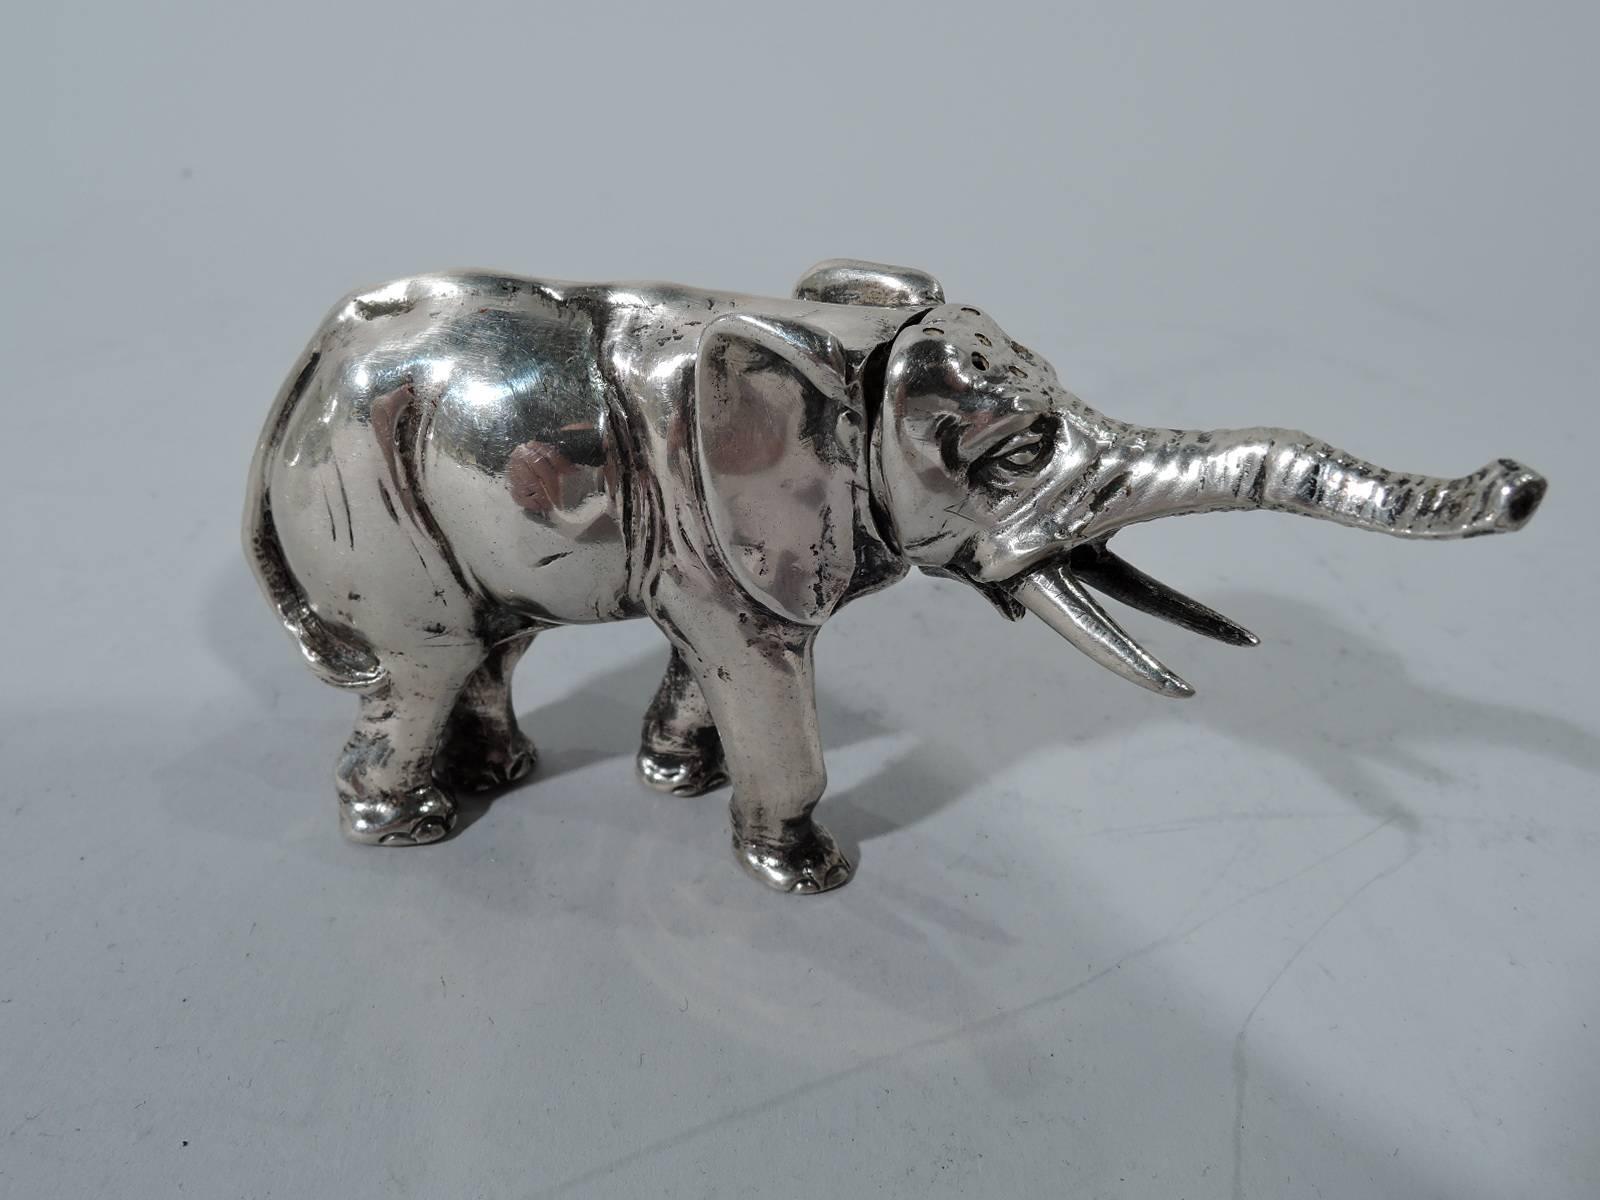 Pair of antique German 800 silver figural salt and pepper shakers. Each: An elephant with raised trunk plods along on stumpy legs. Massive and saggy with sharp tusks and flappy ears. Detachable and pierced head. Hallmark includes turn-of-the-century